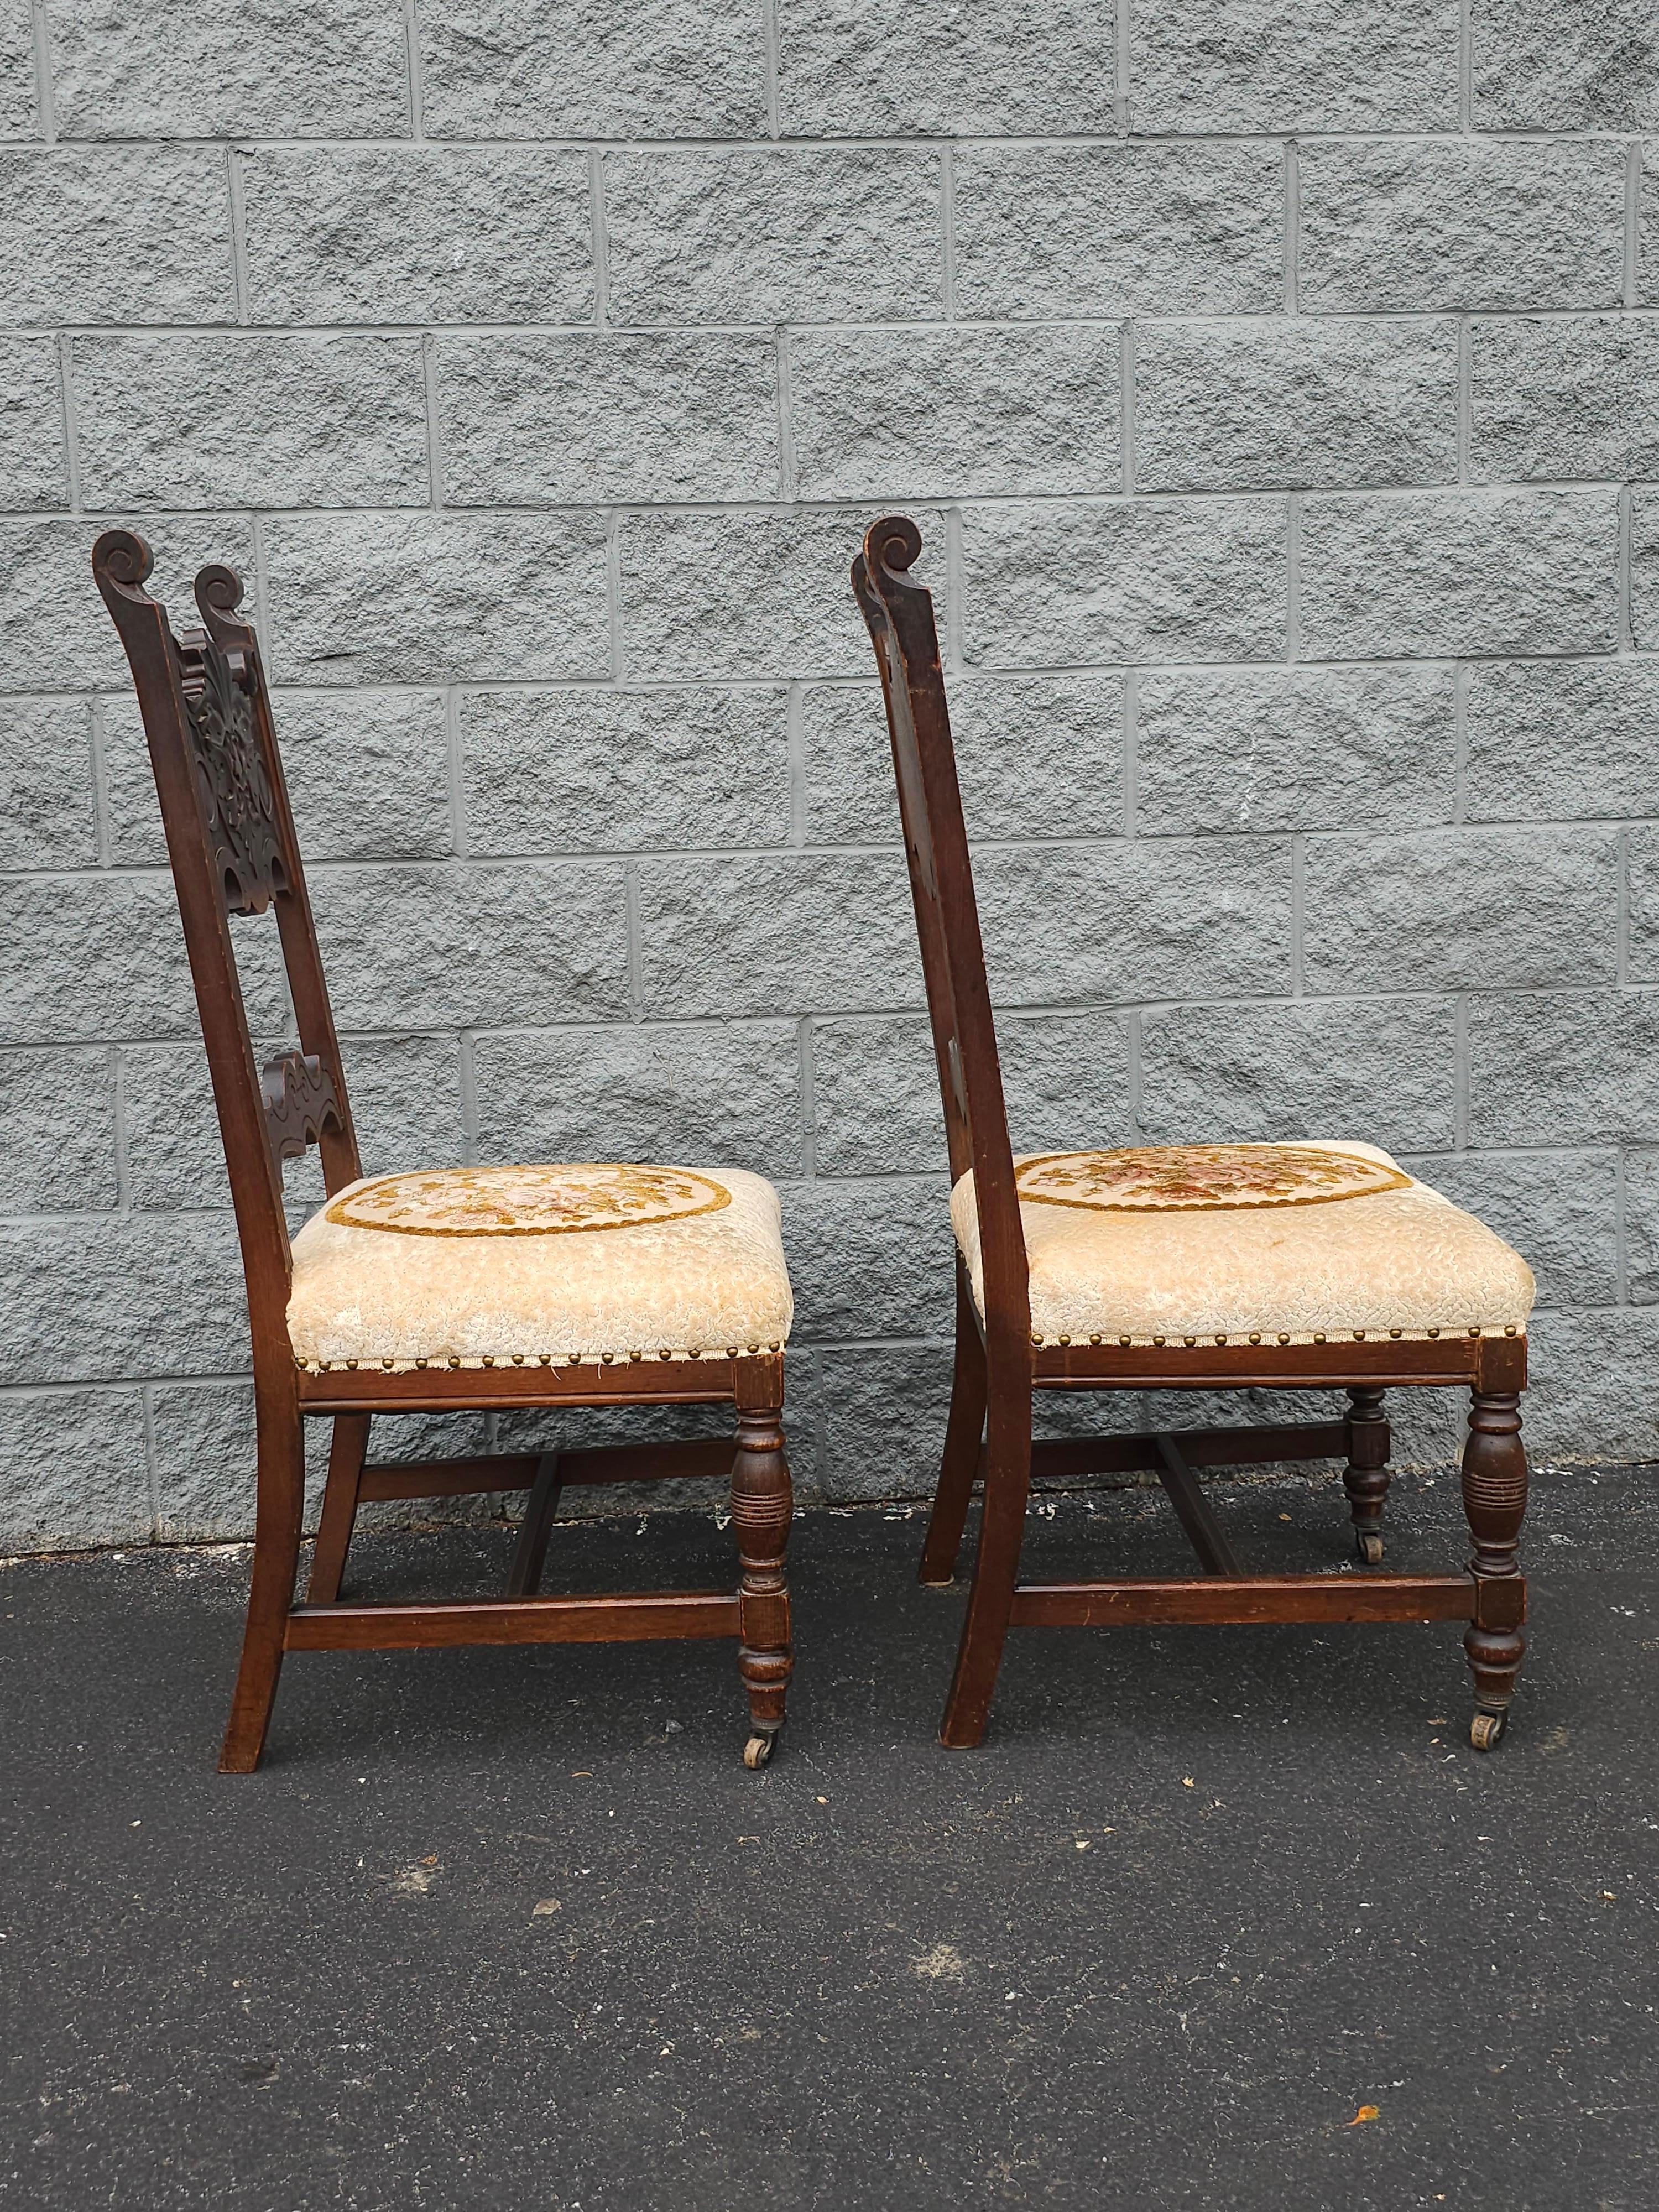 Pair Of Gothic Revival Style Stained Oak Wood And Upholstered Seat Side Chairs In Good Condition For Sale In Germantown, MD